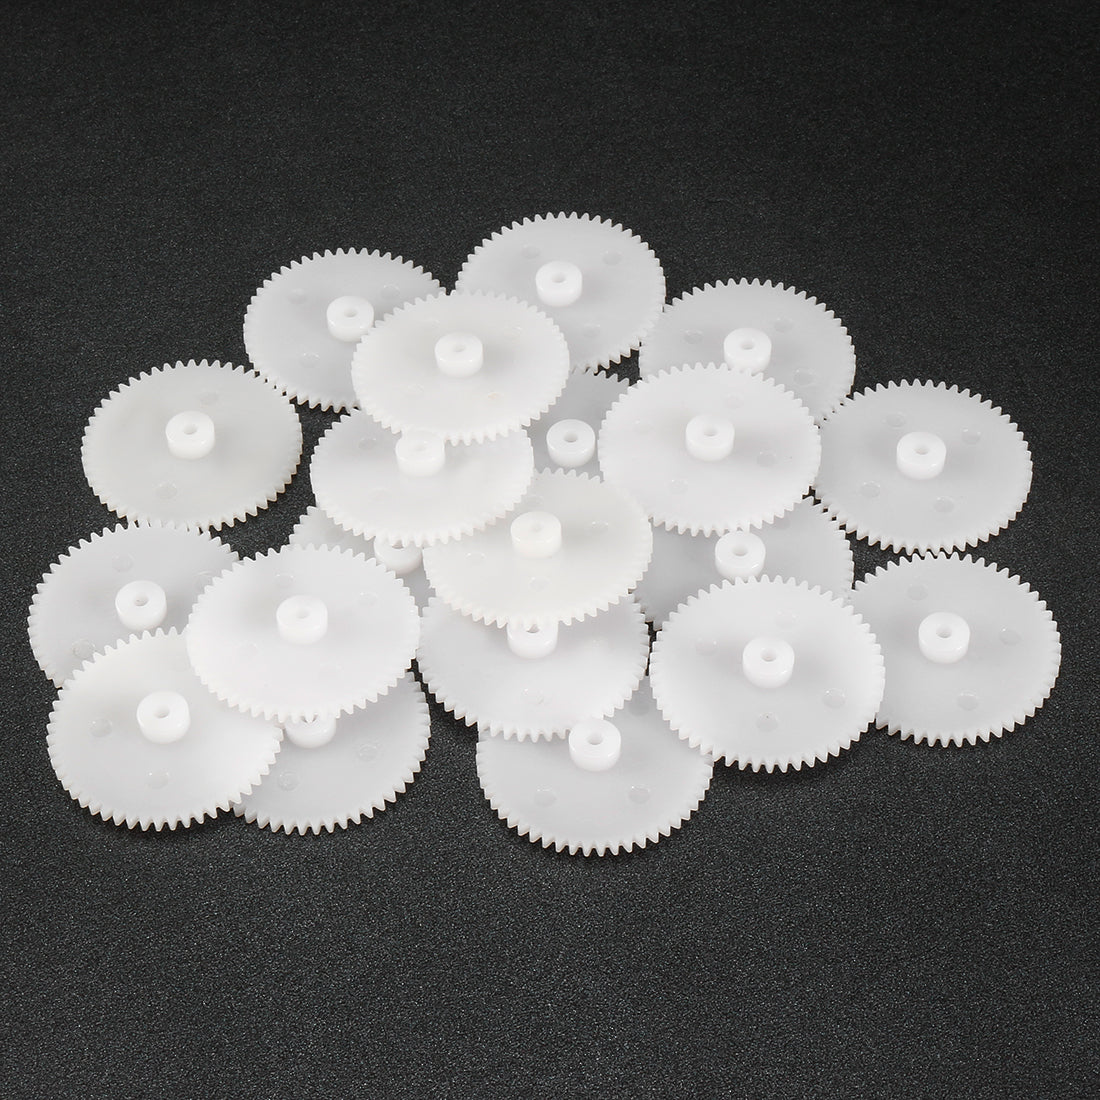 uxcell Uxcell 20Pcs 522A Plastic Gear Accessories with 52 Teeth for DIY Car Robot Motor